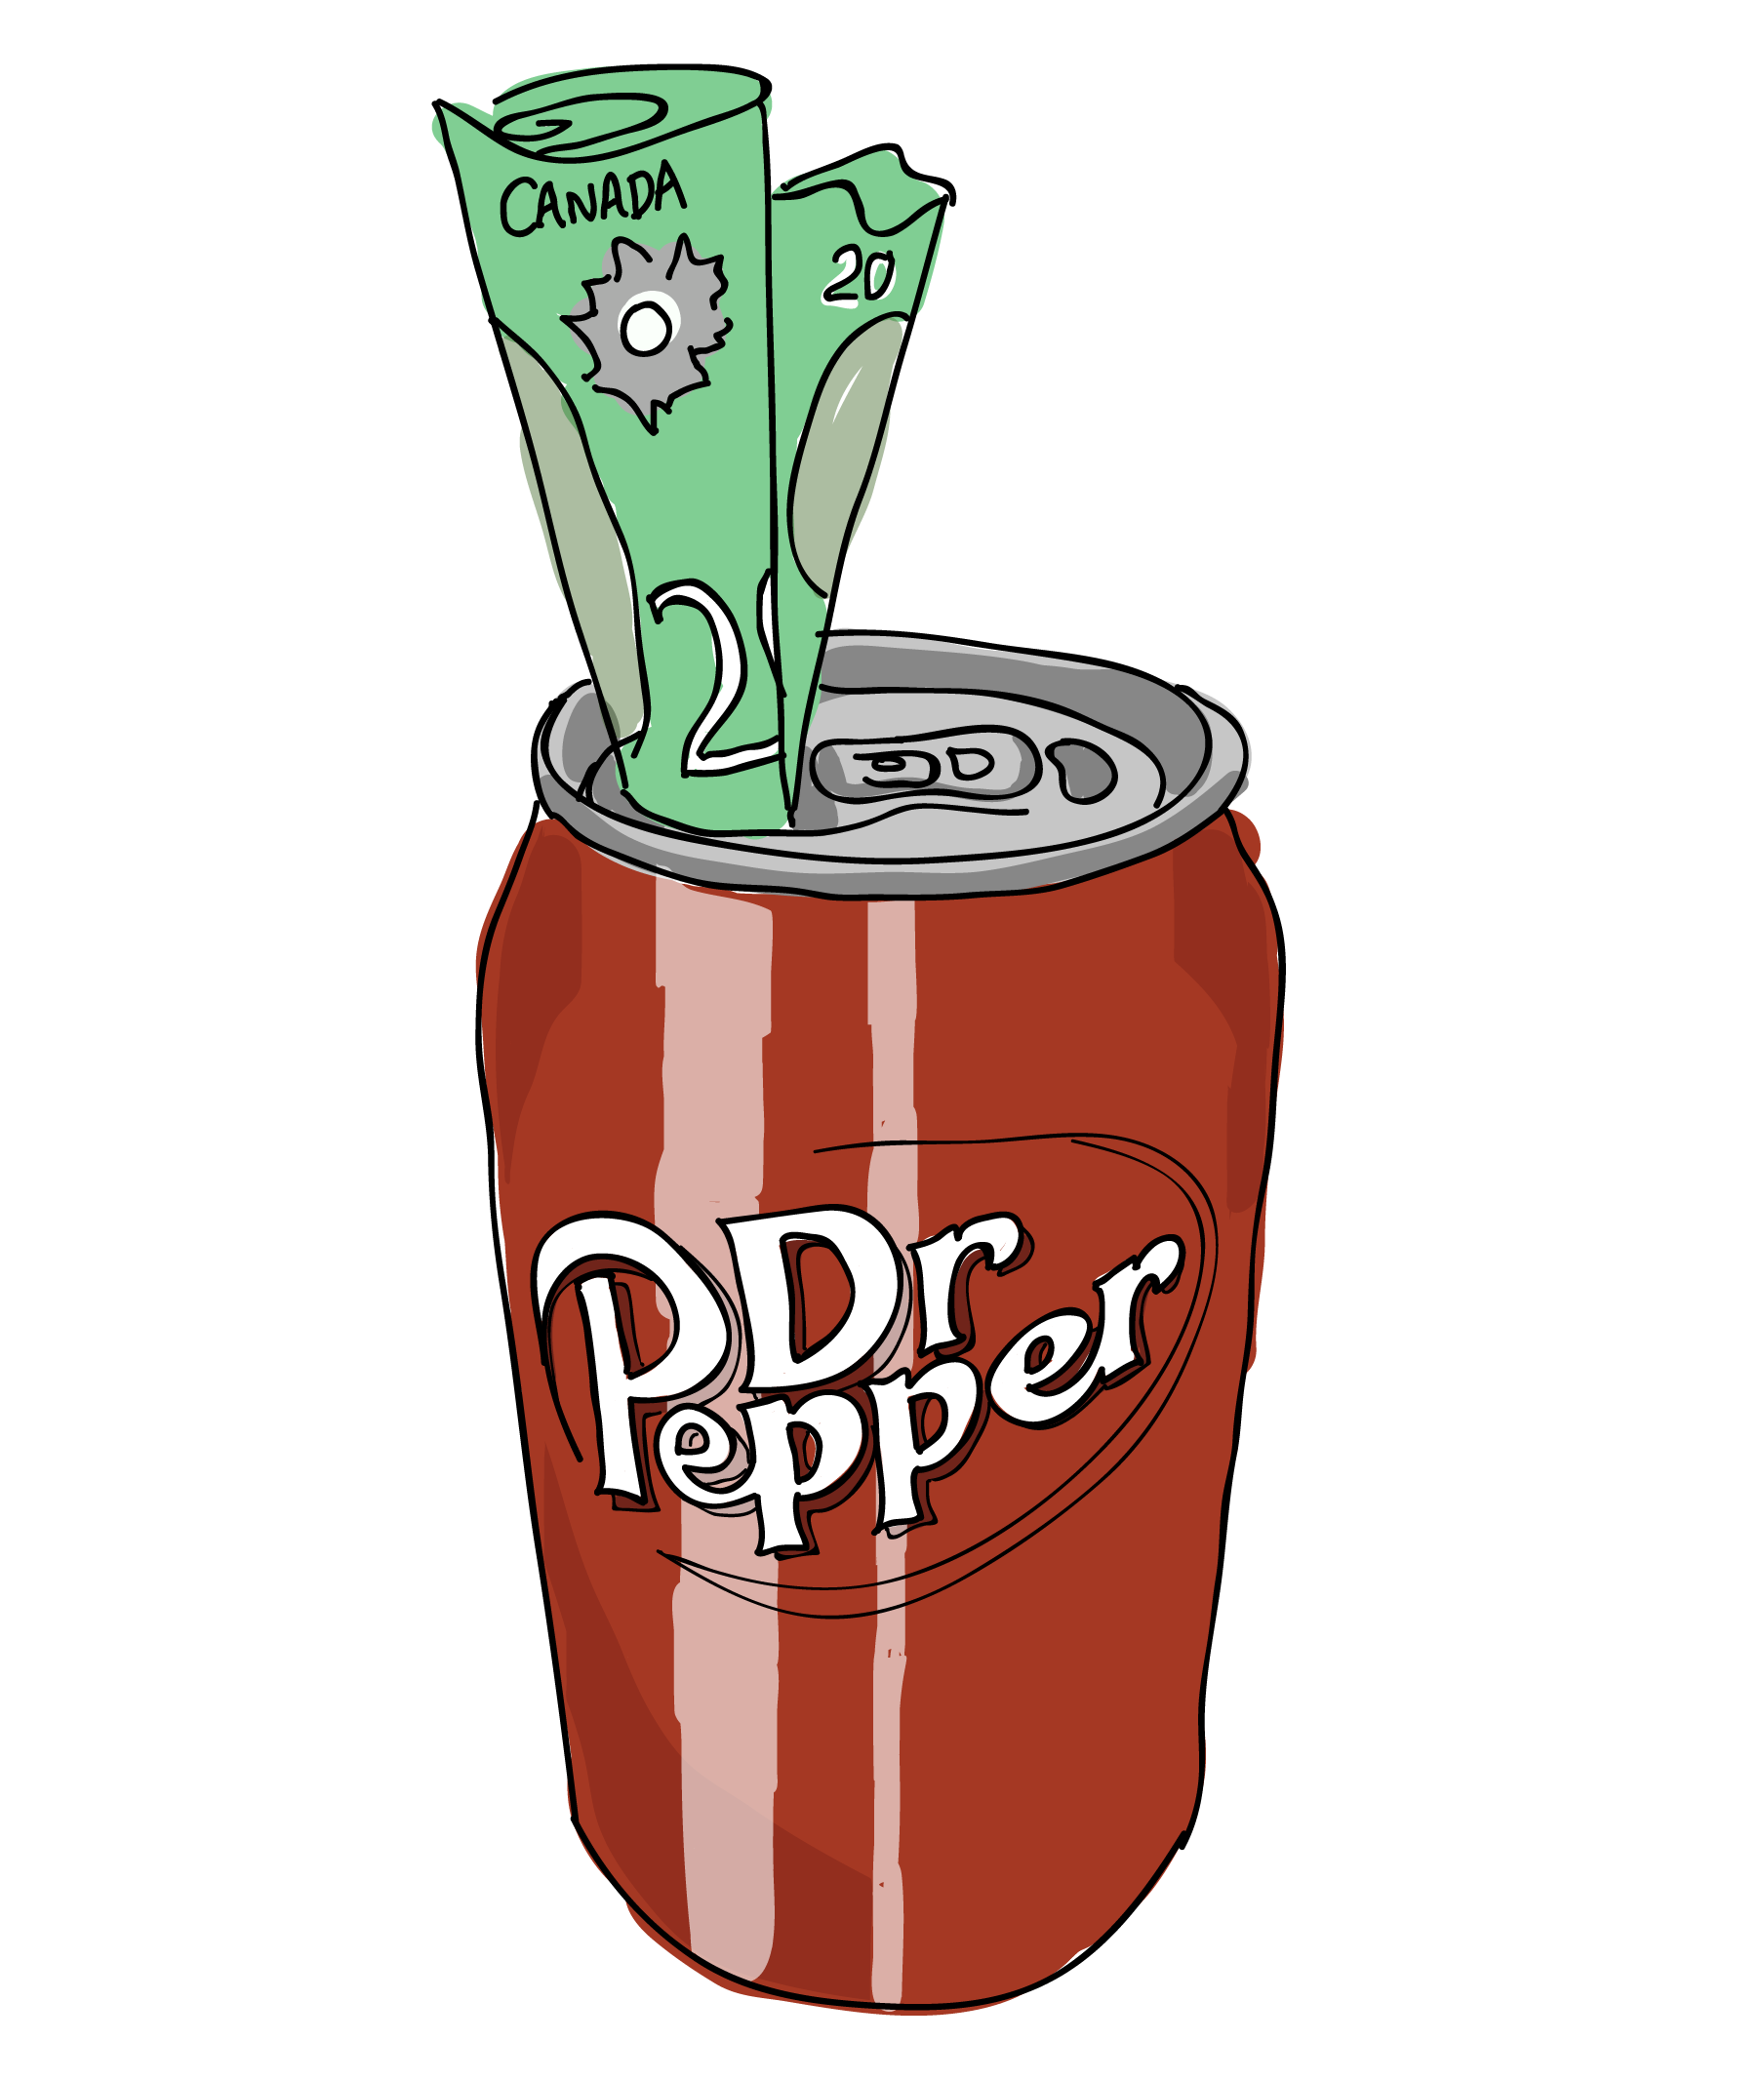 Associate group dr pepper. Drinking clipart beerclip